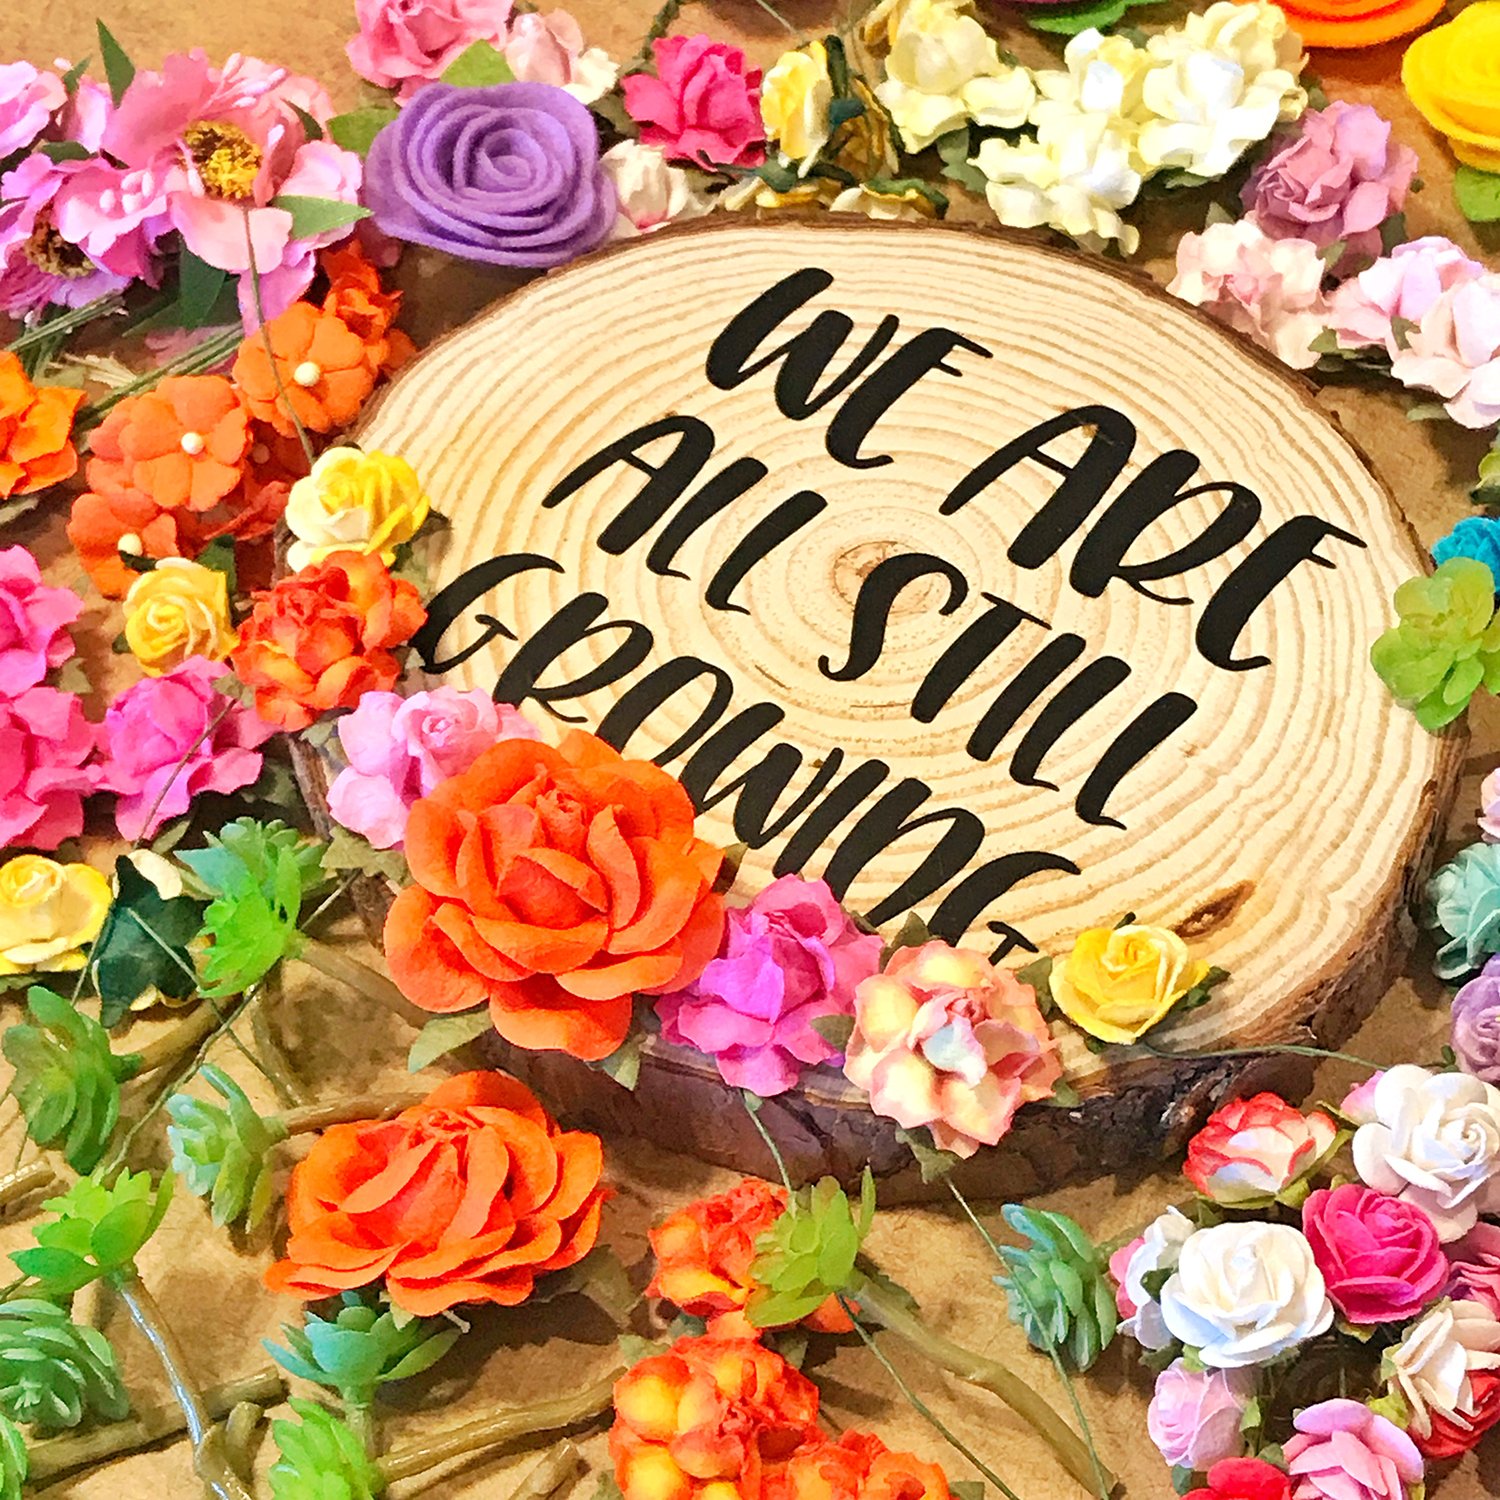 flowers surrounding we are still growing sign